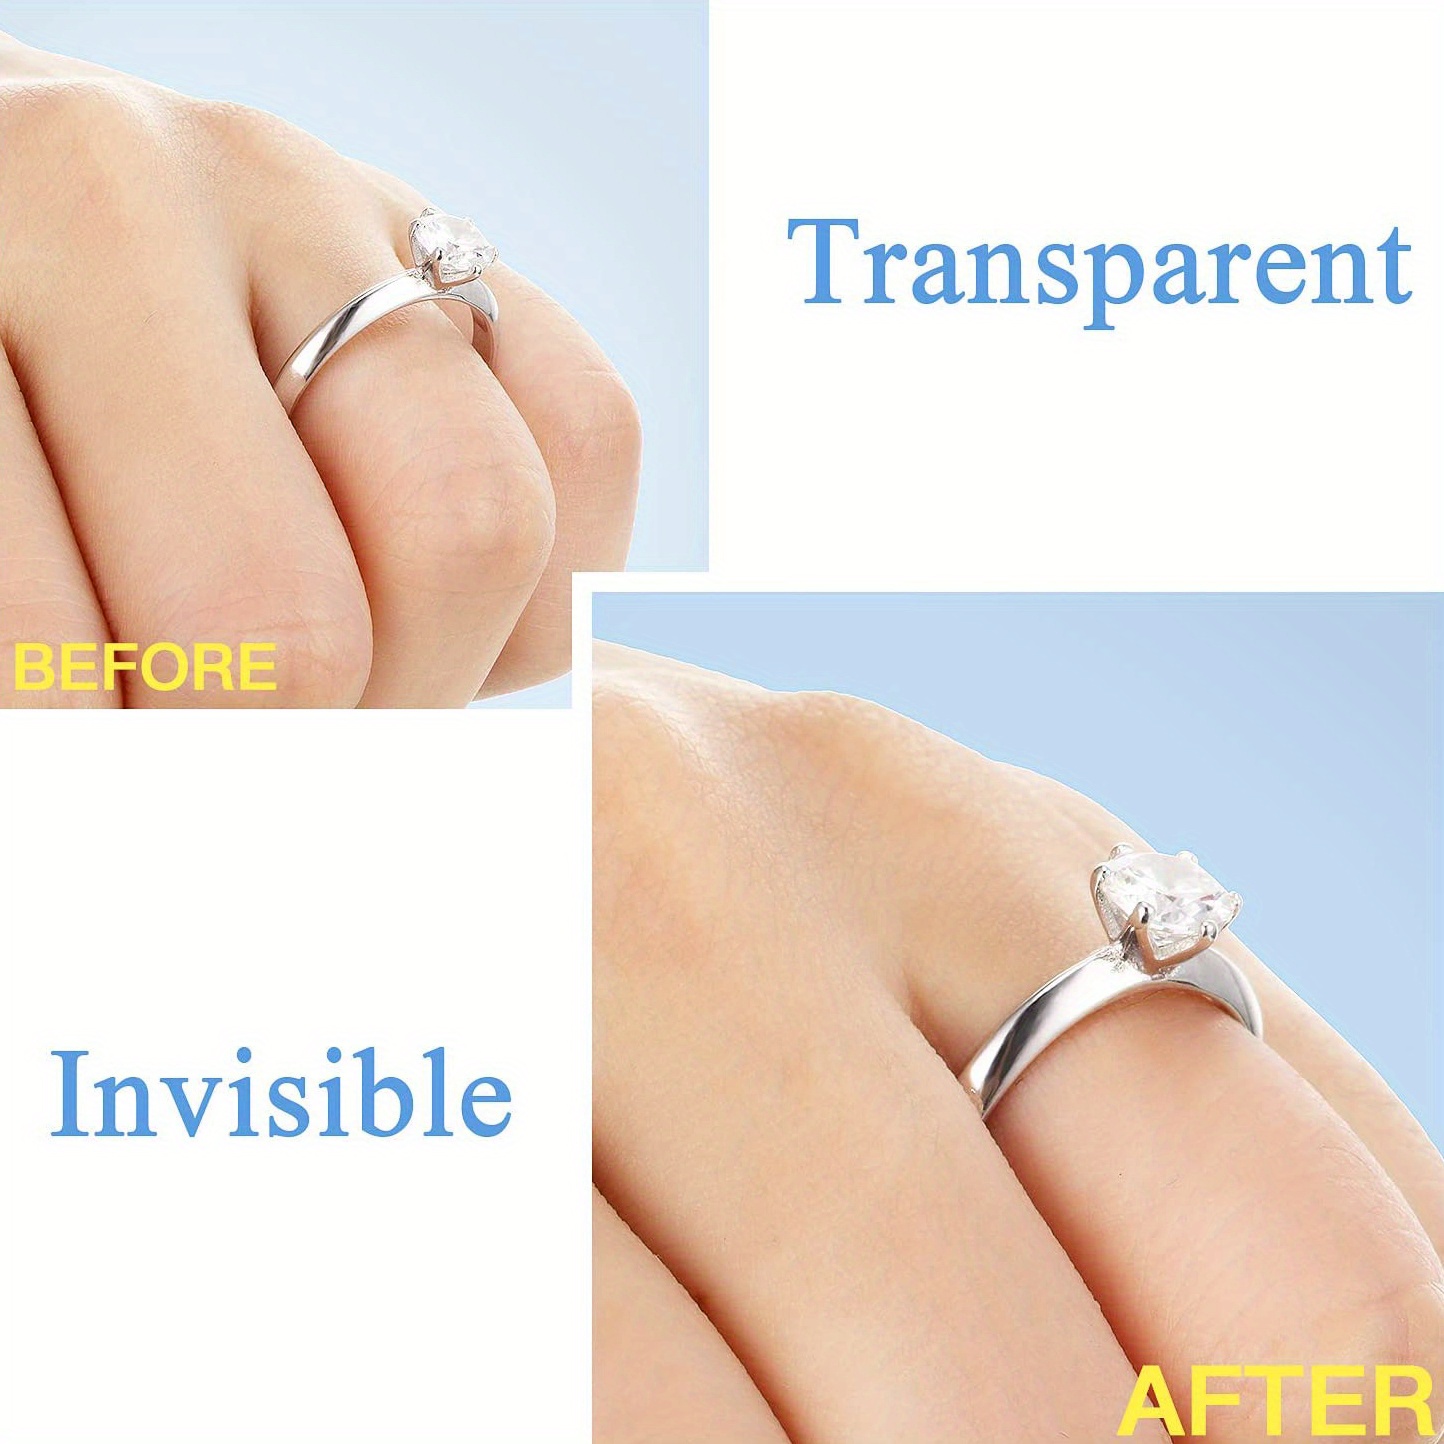 2Sheets invisible ring adjuster Sizers silicone ring guard